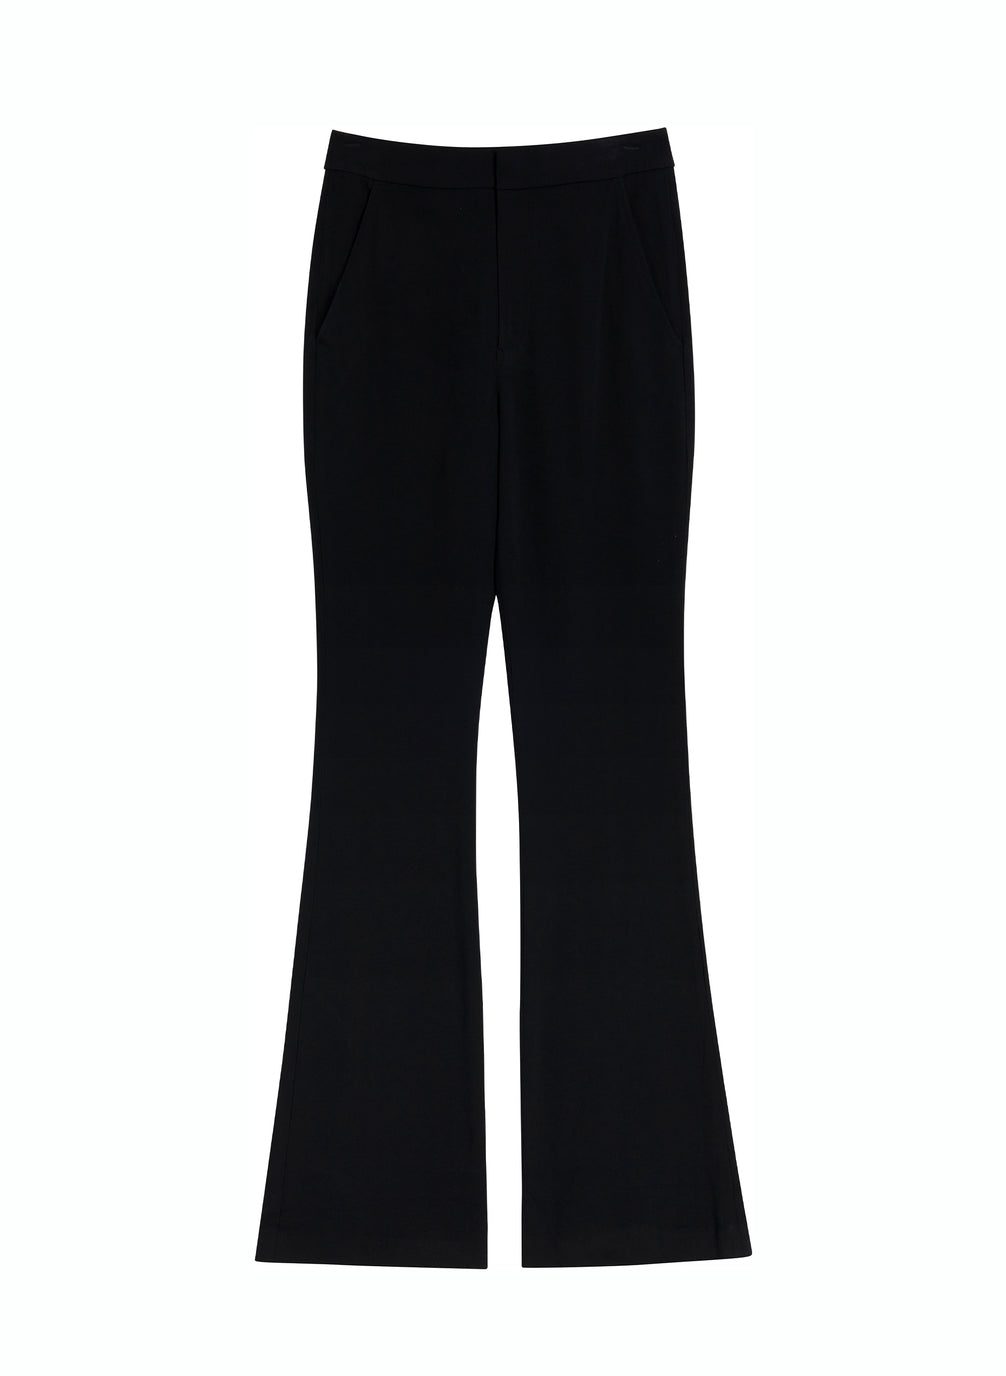 A.L.C. Sophie II Stretch Tailored Pant